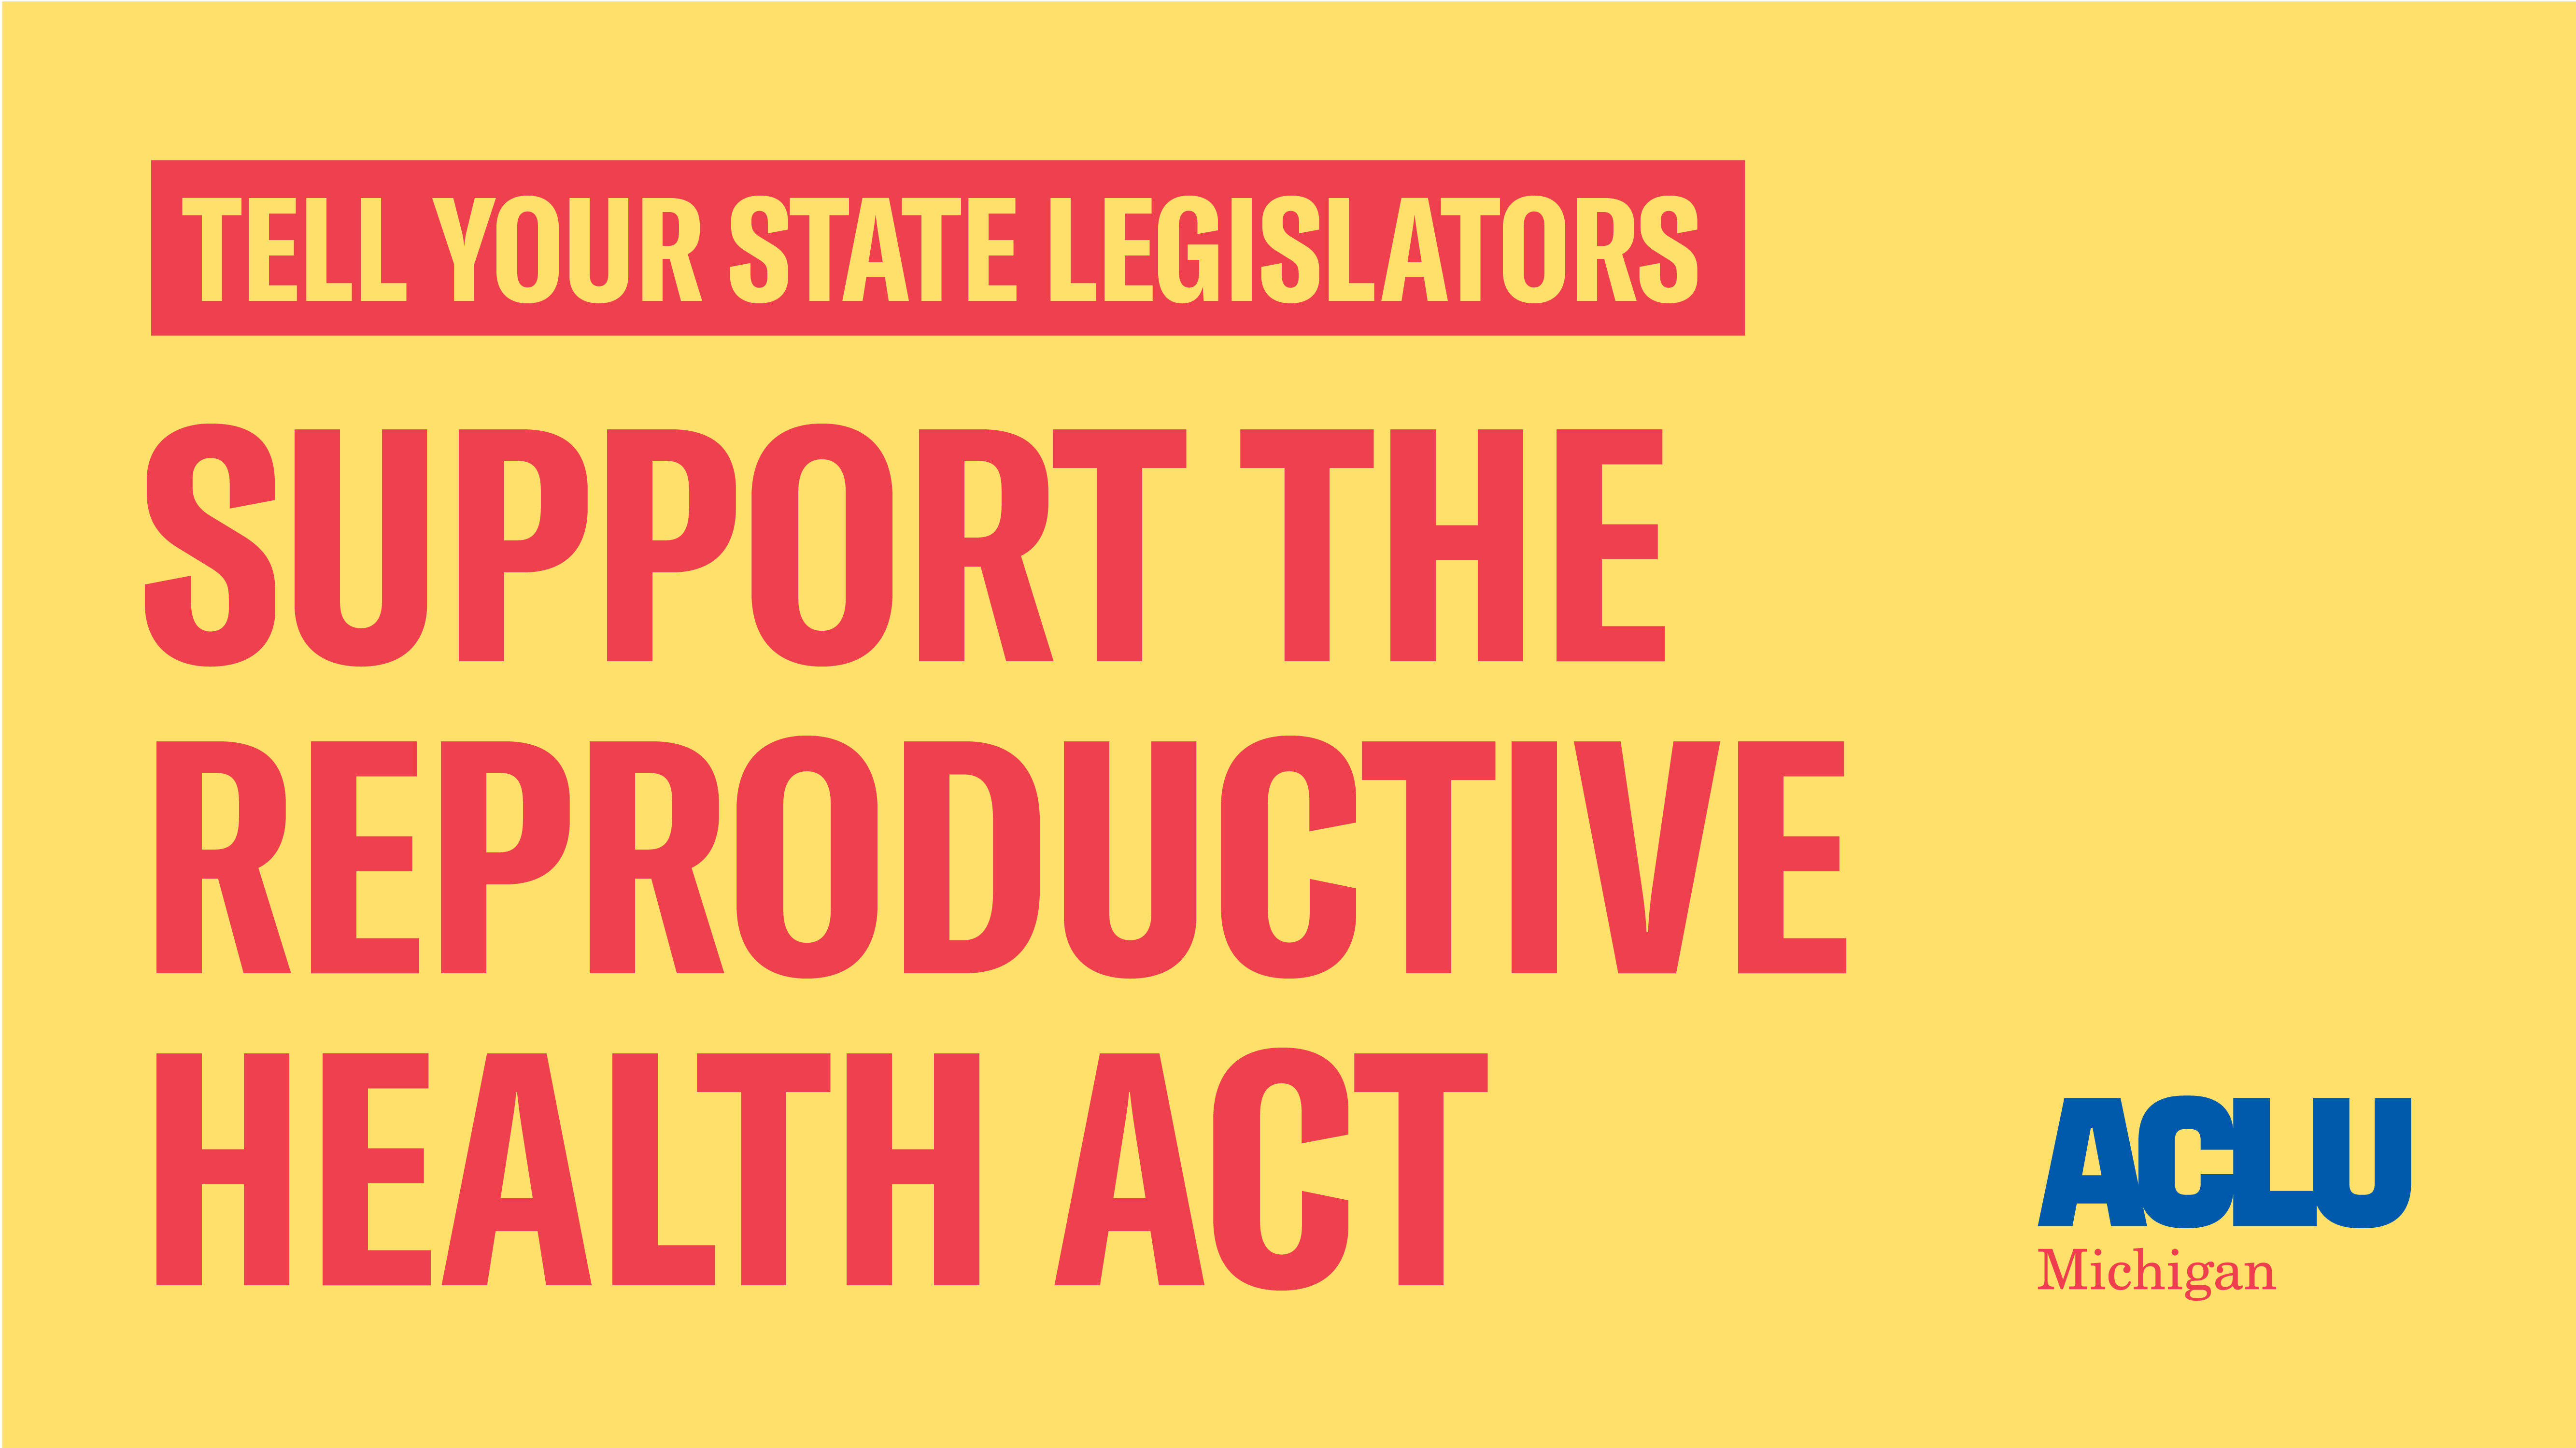 Tell Michigan House Representatives to Support the Reproductive Health Act